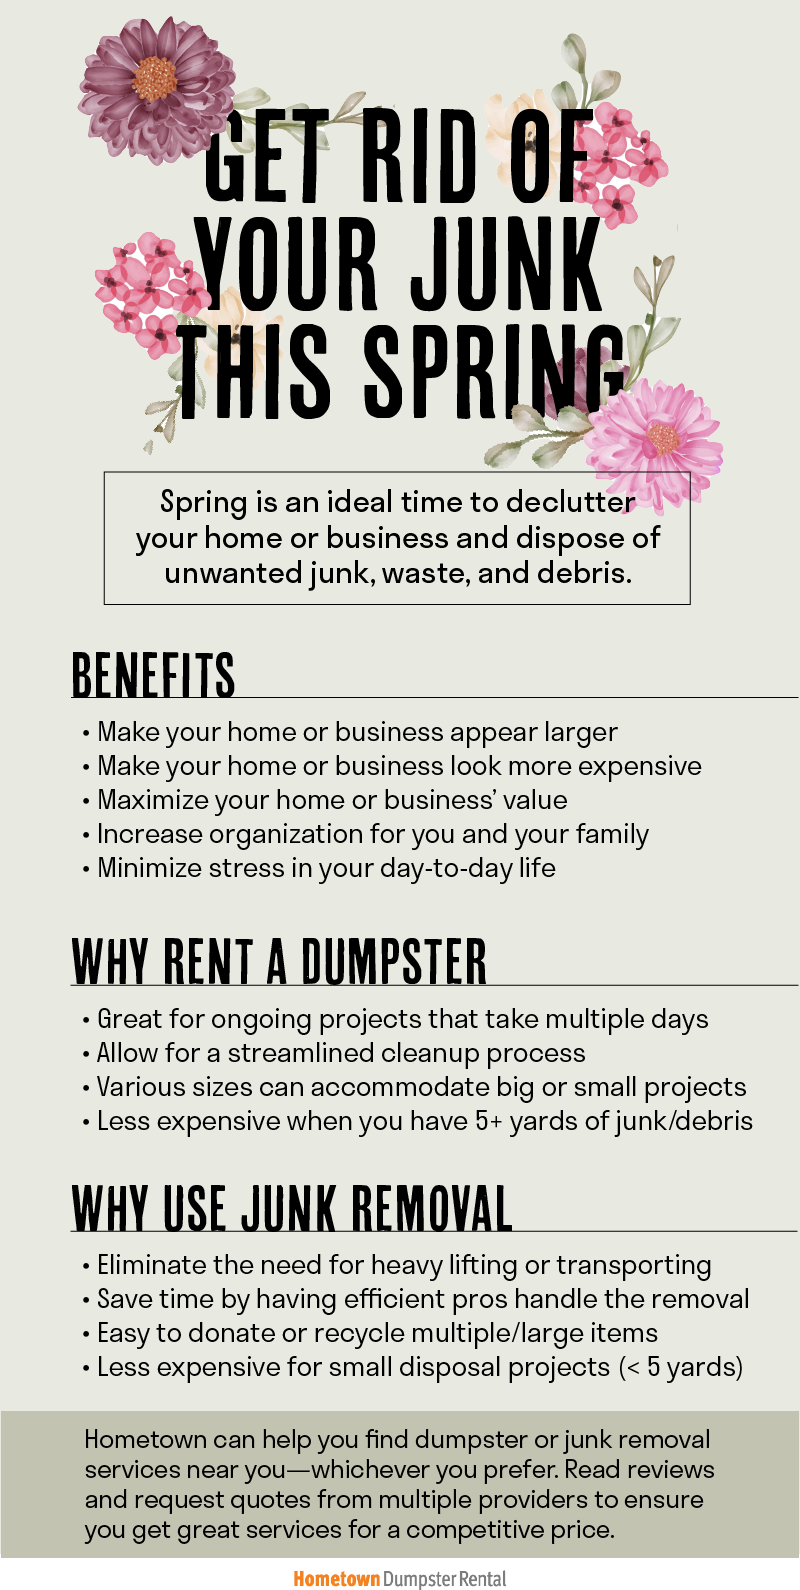 get rid of junk this spring infographic